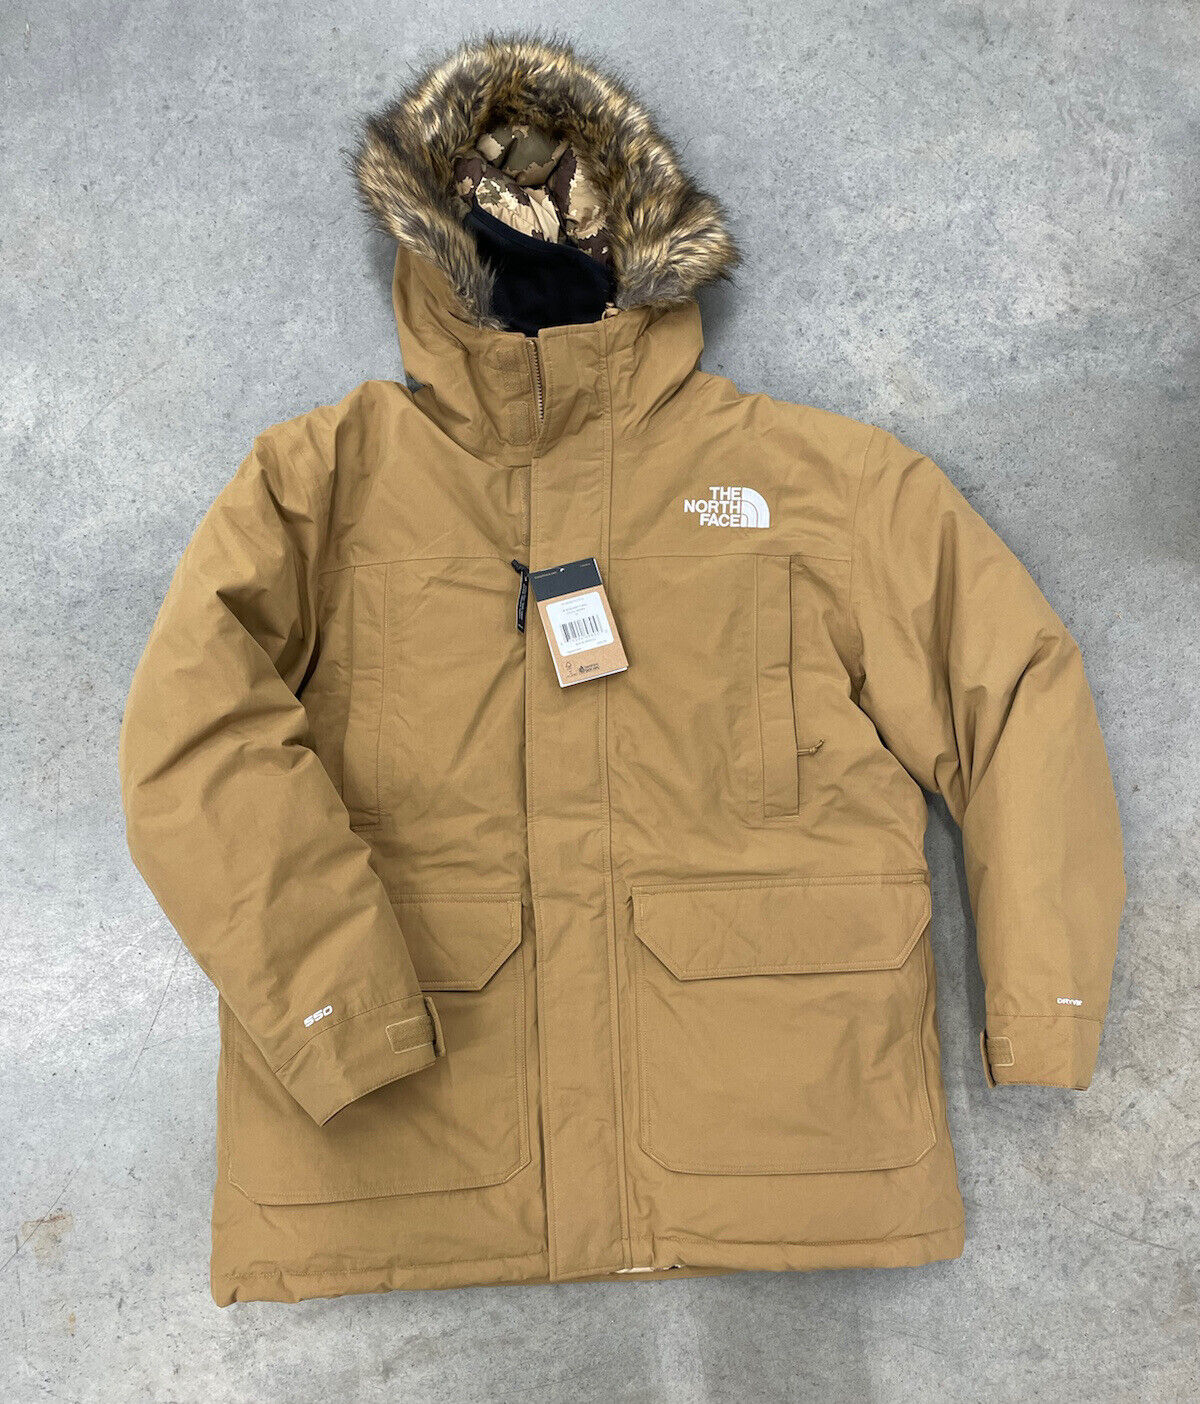 The North Face Down Parka Jacket Mens Utility Brown eBay